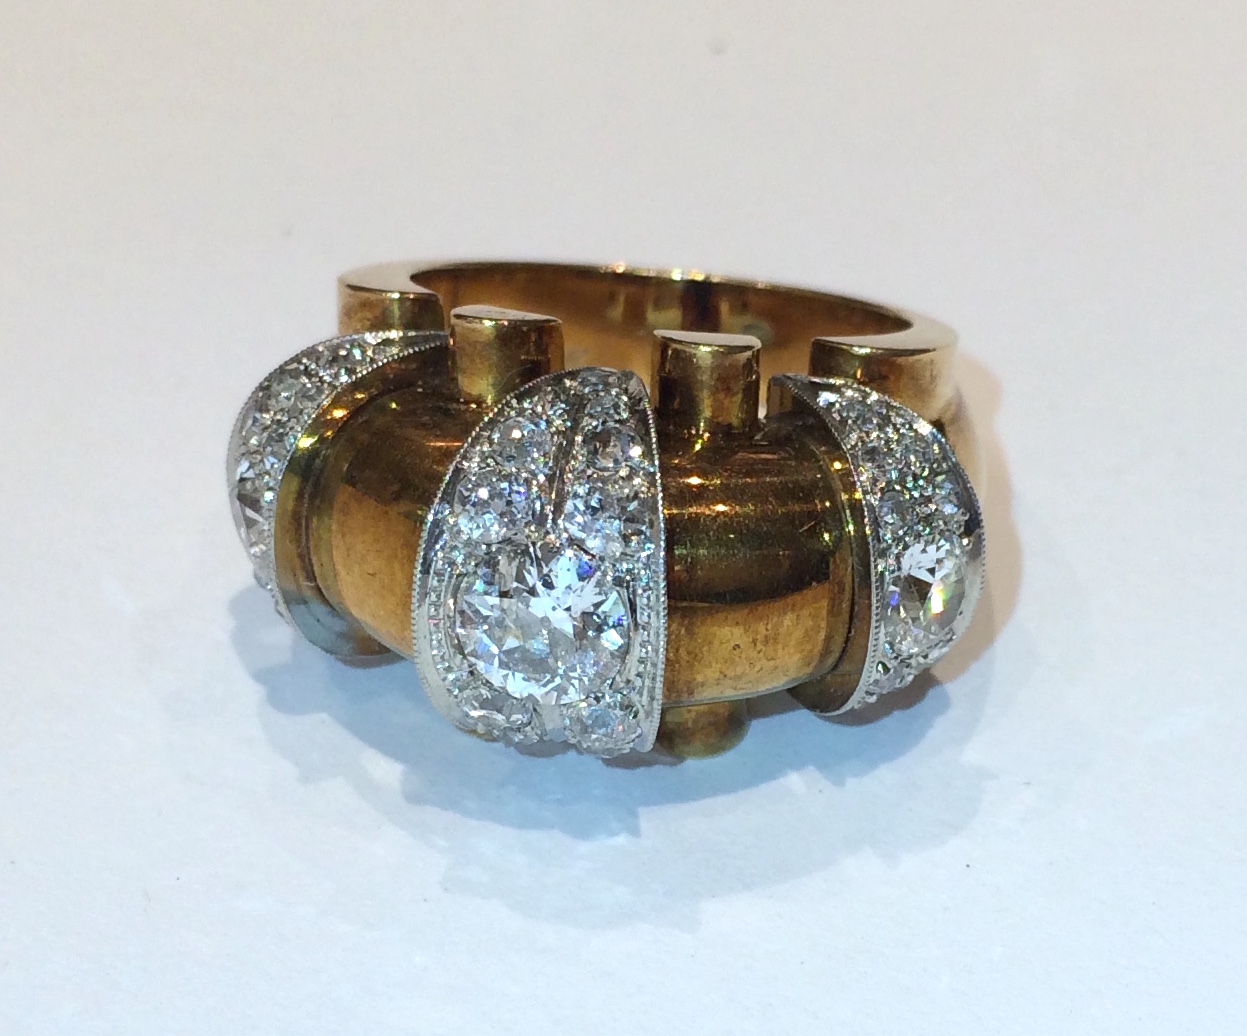 European Modernist ring set with three round diamonds (approx. 2 carats TW) and further set with 34 diamonds (approx. 4 carats TW) in three platinum sections on a 14K gold ring, signed, c.1930